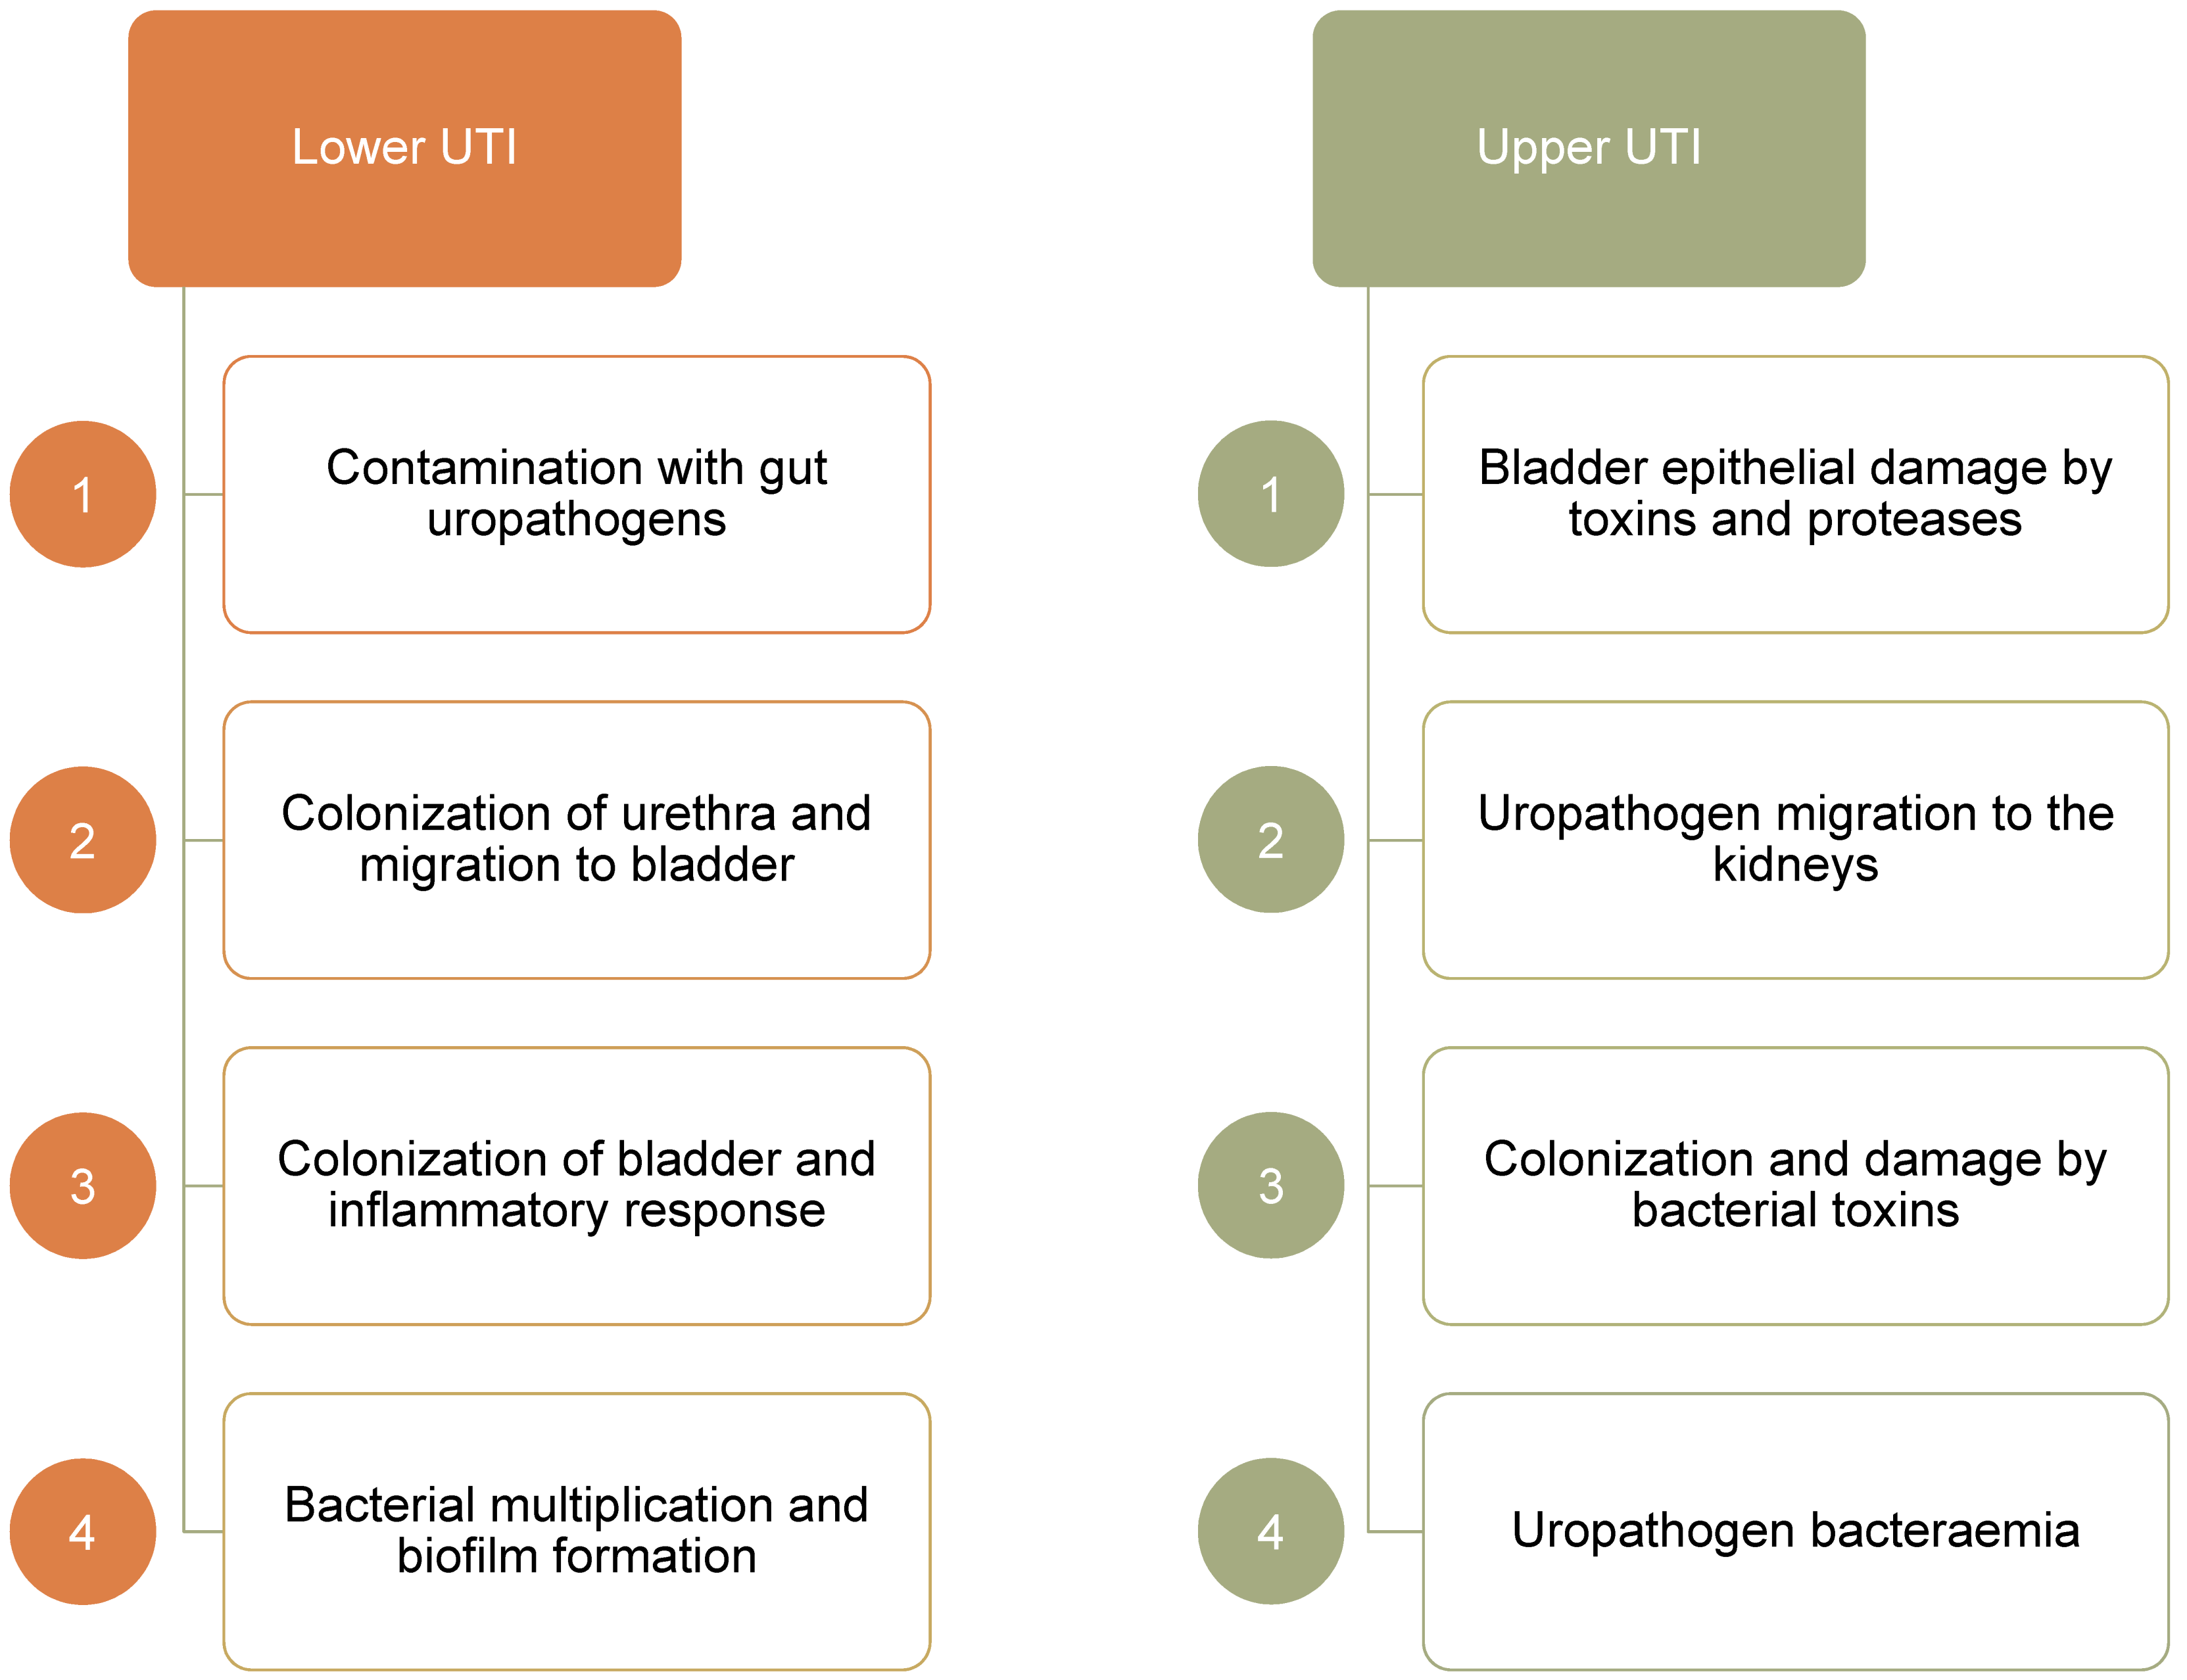 Figure 1: Urinary tract is a continuous road that can be colonized and damaged by uropathogens and uncontrolled inflammatory response